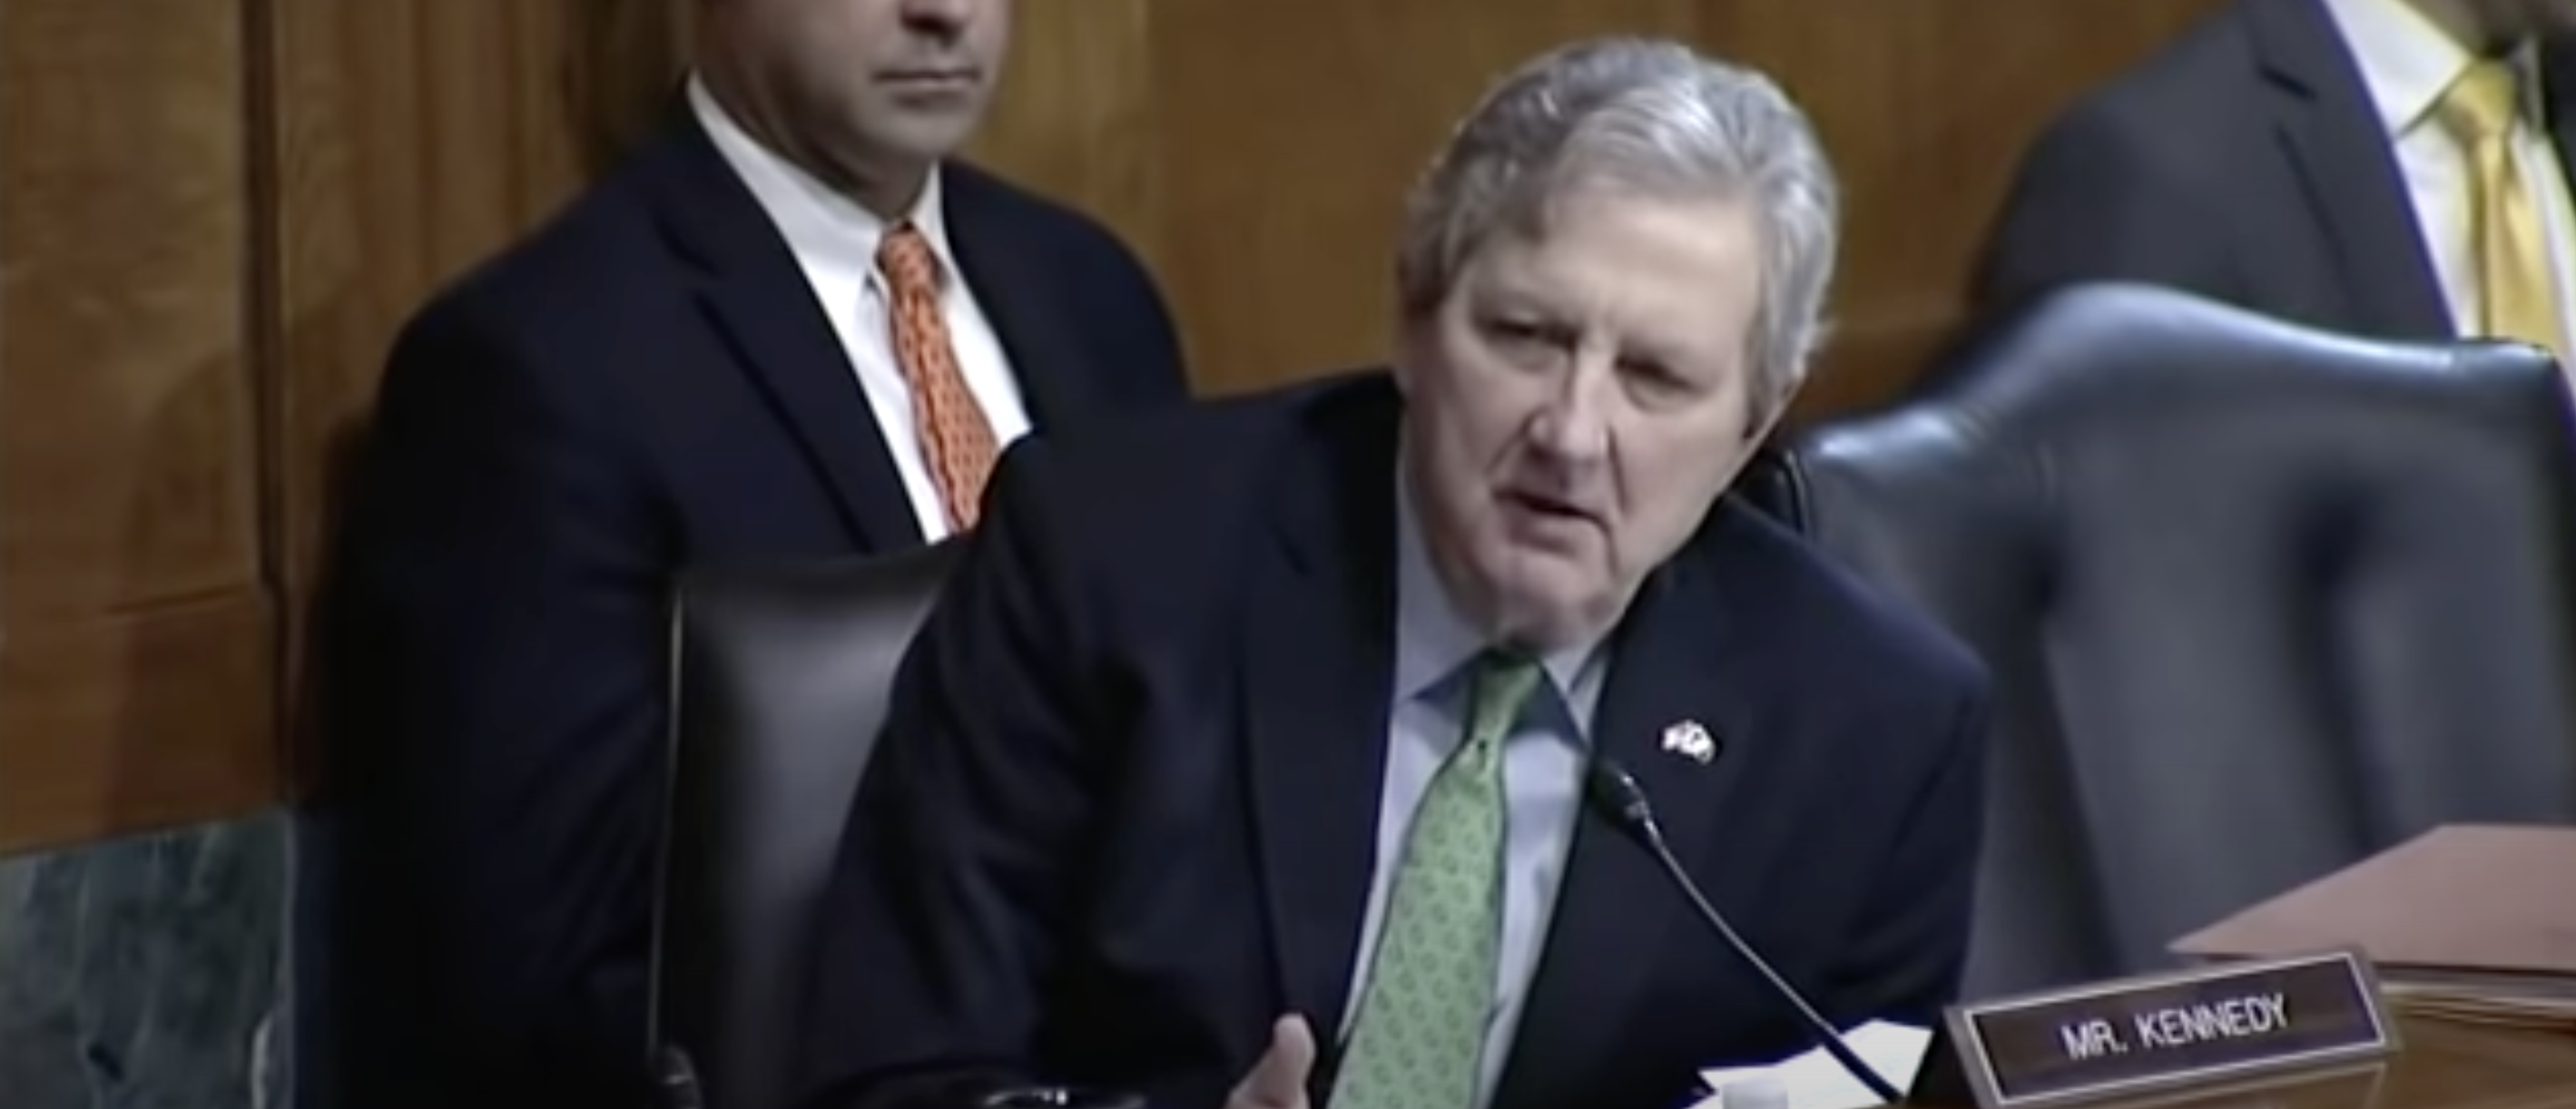 John Kennedy Asks Biden Nominee Anne Traum The Same Question 9 Times In A Row